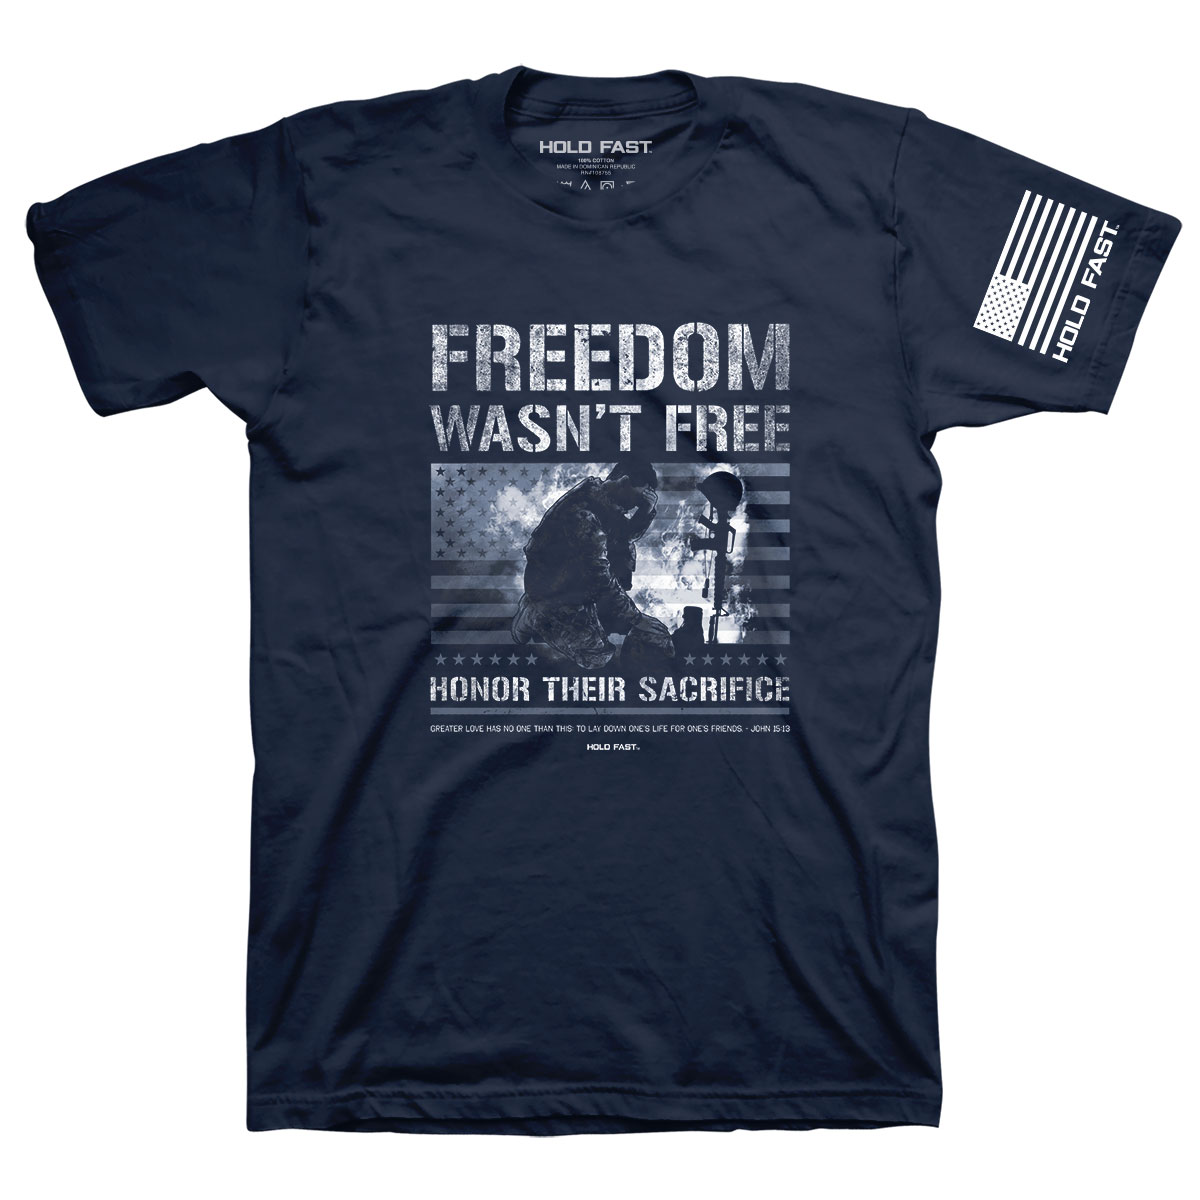 HOLD FAST Mens T-Shirt Freedom Wasn’t Free – christianapostles.com